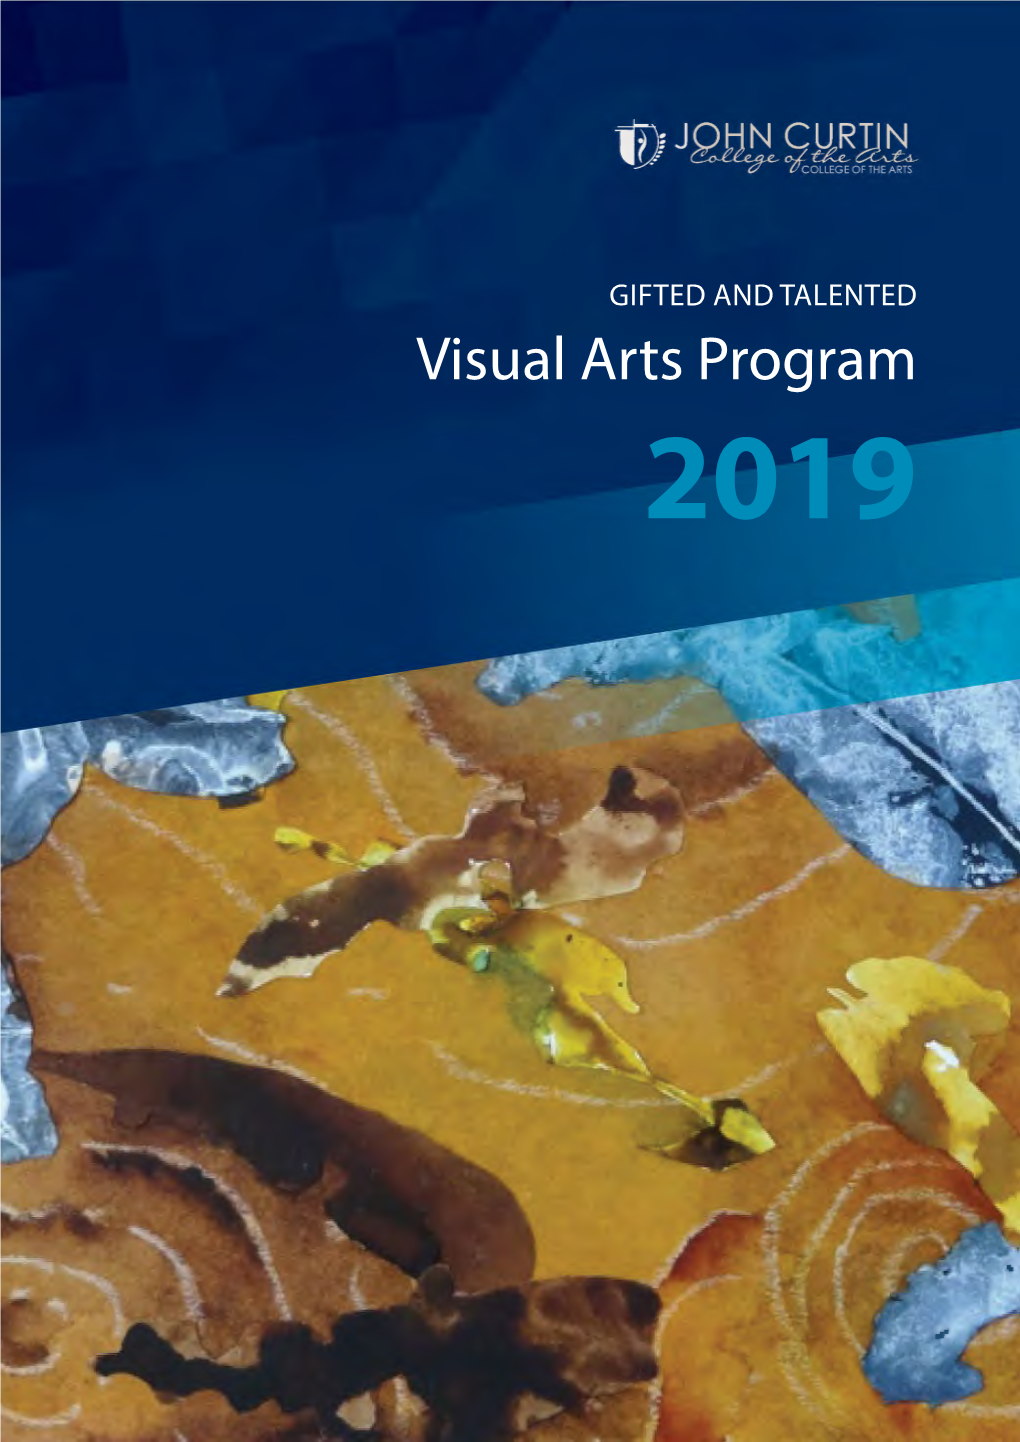 Visual Arts Program 2019 2 / Gifted and Talented | Visual Arts Program 2019 Welcome